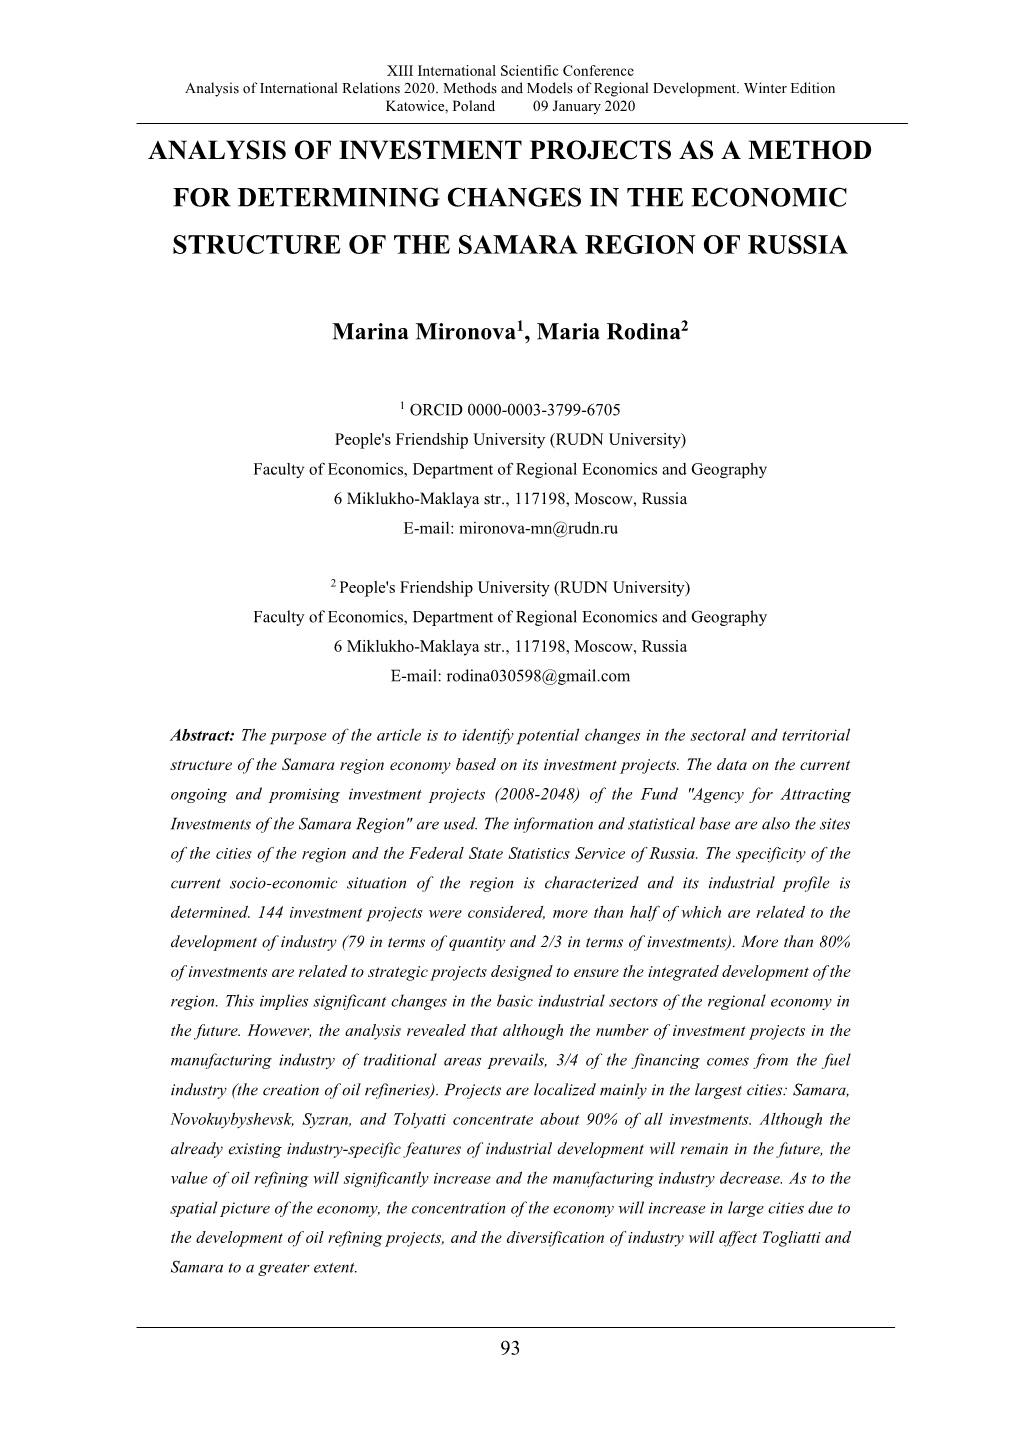 Analysis of Investment Projects As a Method for Determining Changes in the Economic Structure of the Samara Region of Russia